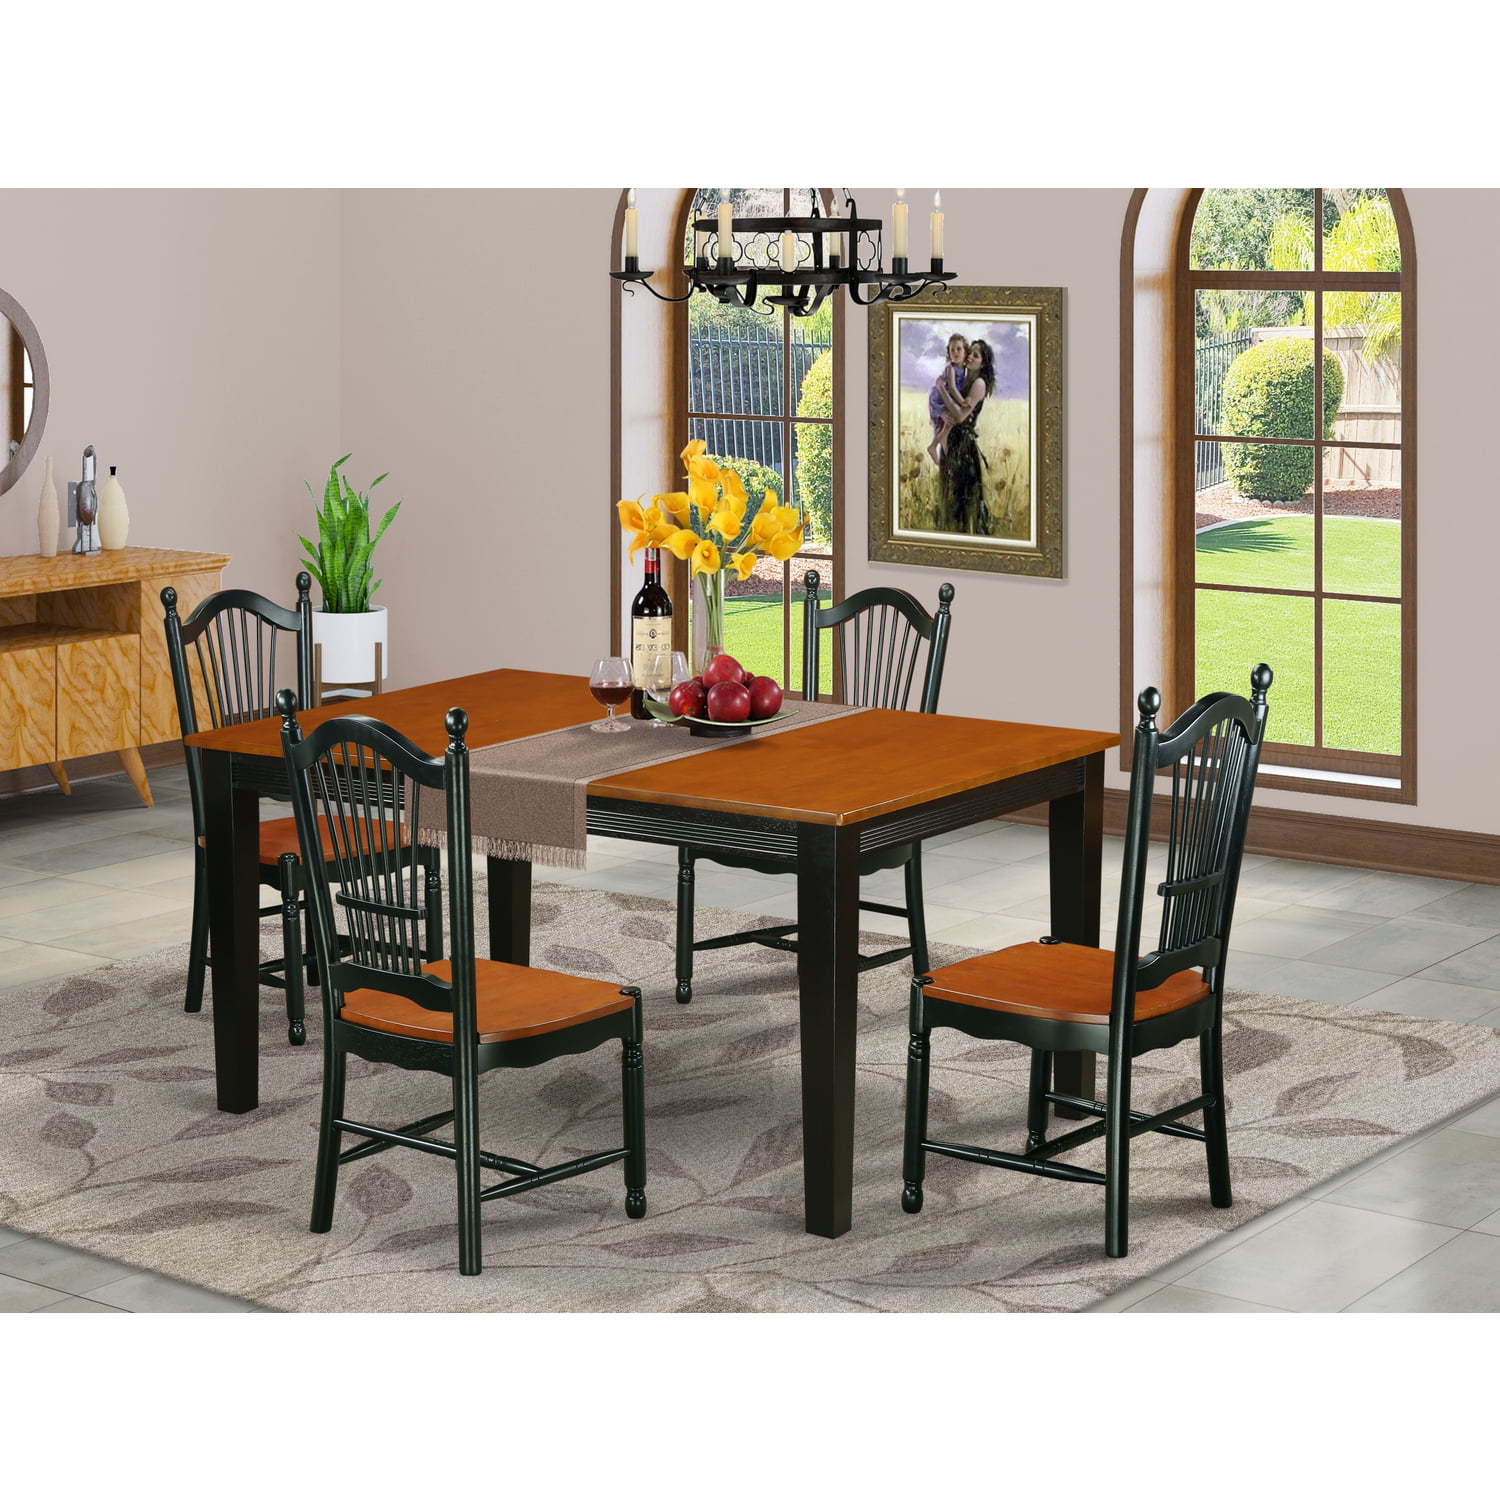 East West Furniture QUDO5-BCH-W 5 Pc Kitchen table set with a Dining Table  and 4 Wood Seat Chairs in A Rich Black and Cherry Finish-Finish:Black &  Cherry,Shape:Rectangular,Style:Wood Seat - Walmart.com